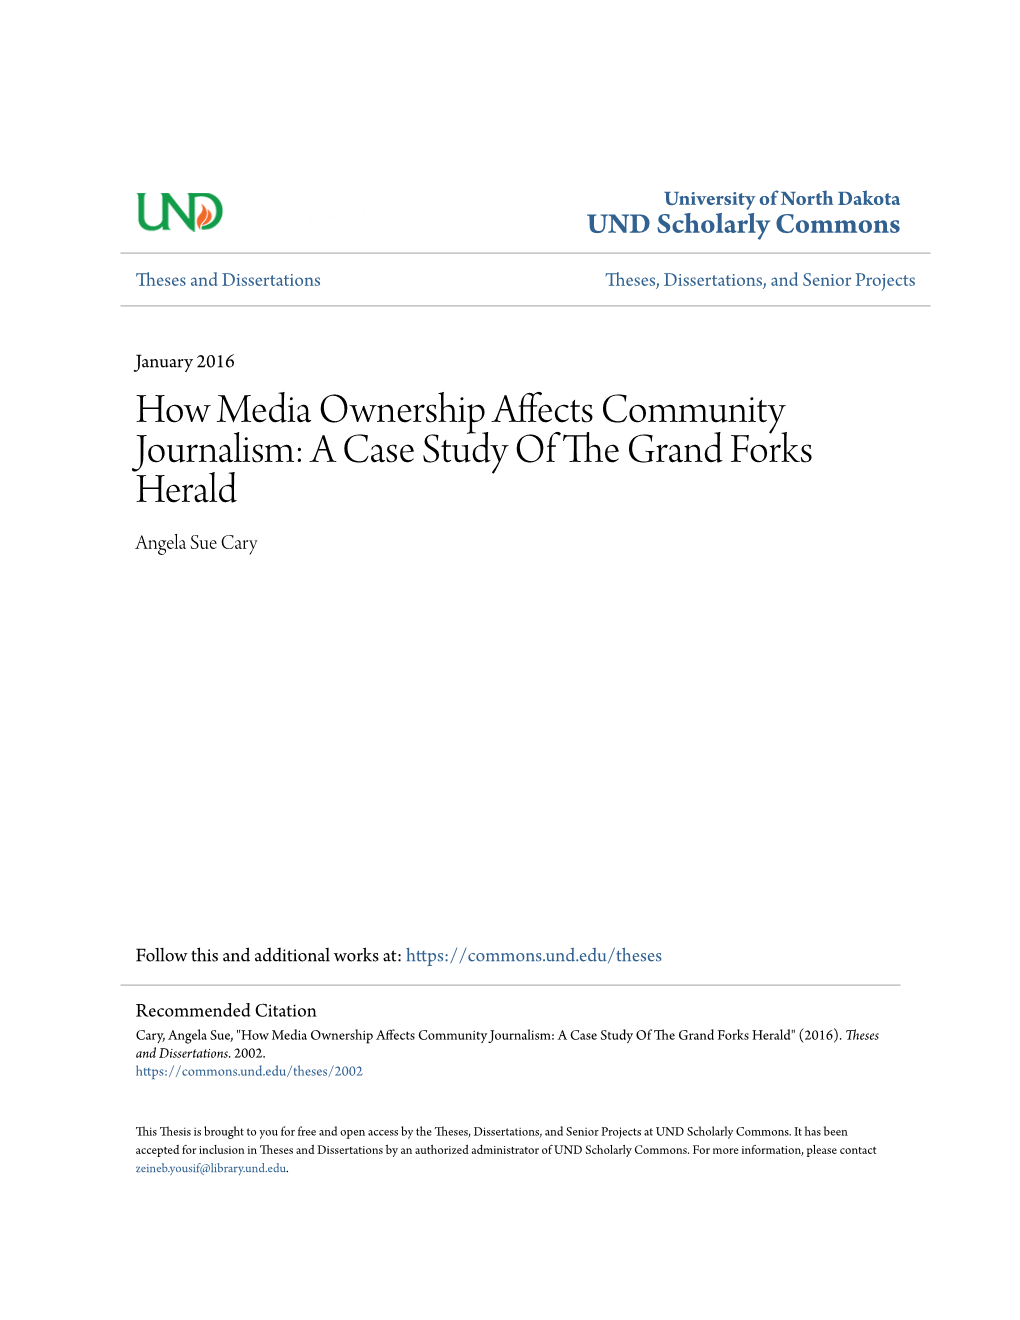 How Media Ownership Affects Community Journalism: a Case Study of the Grand Forks Herald Angela Sue Cary